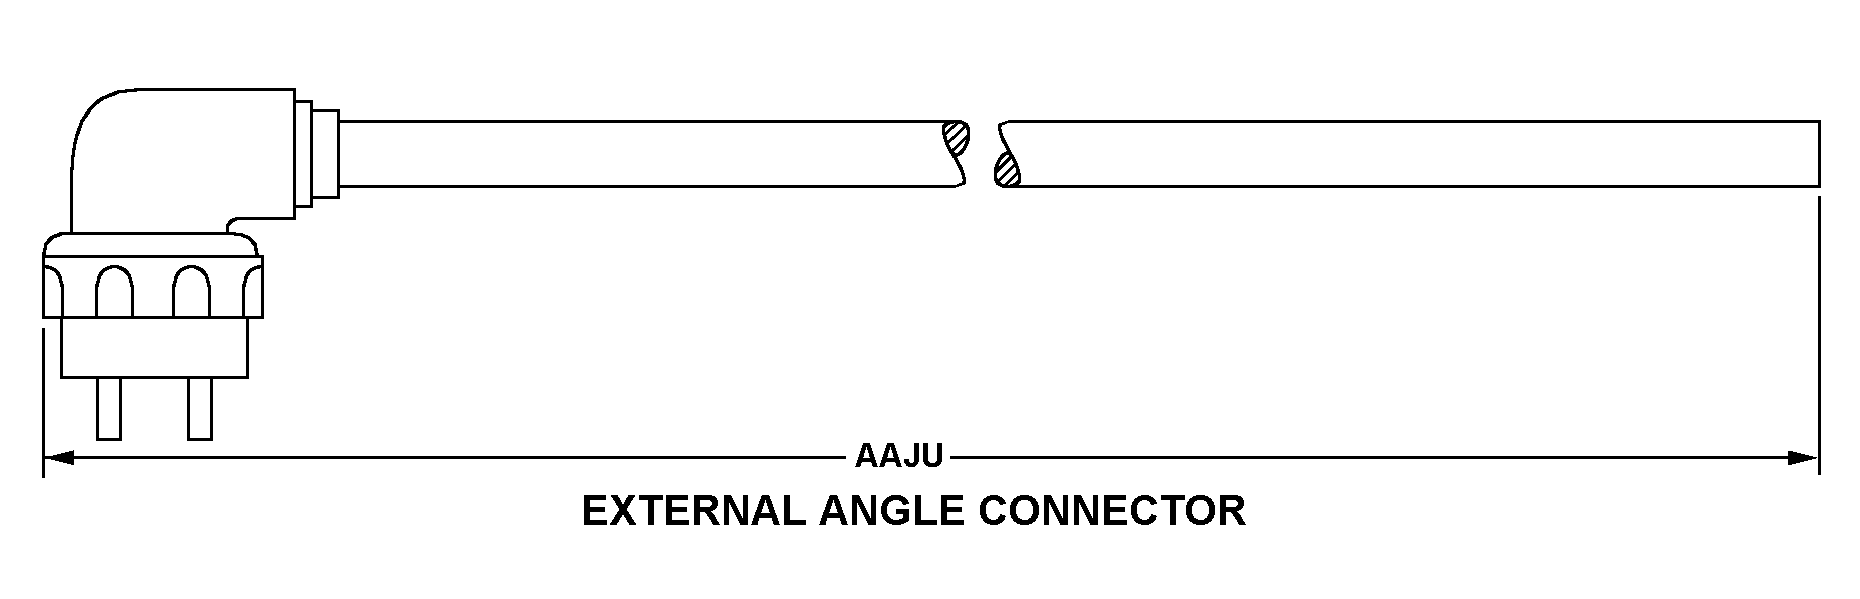 EXTERNAL ANGLE CONNECTOR style nsn 6150-01-575-6599